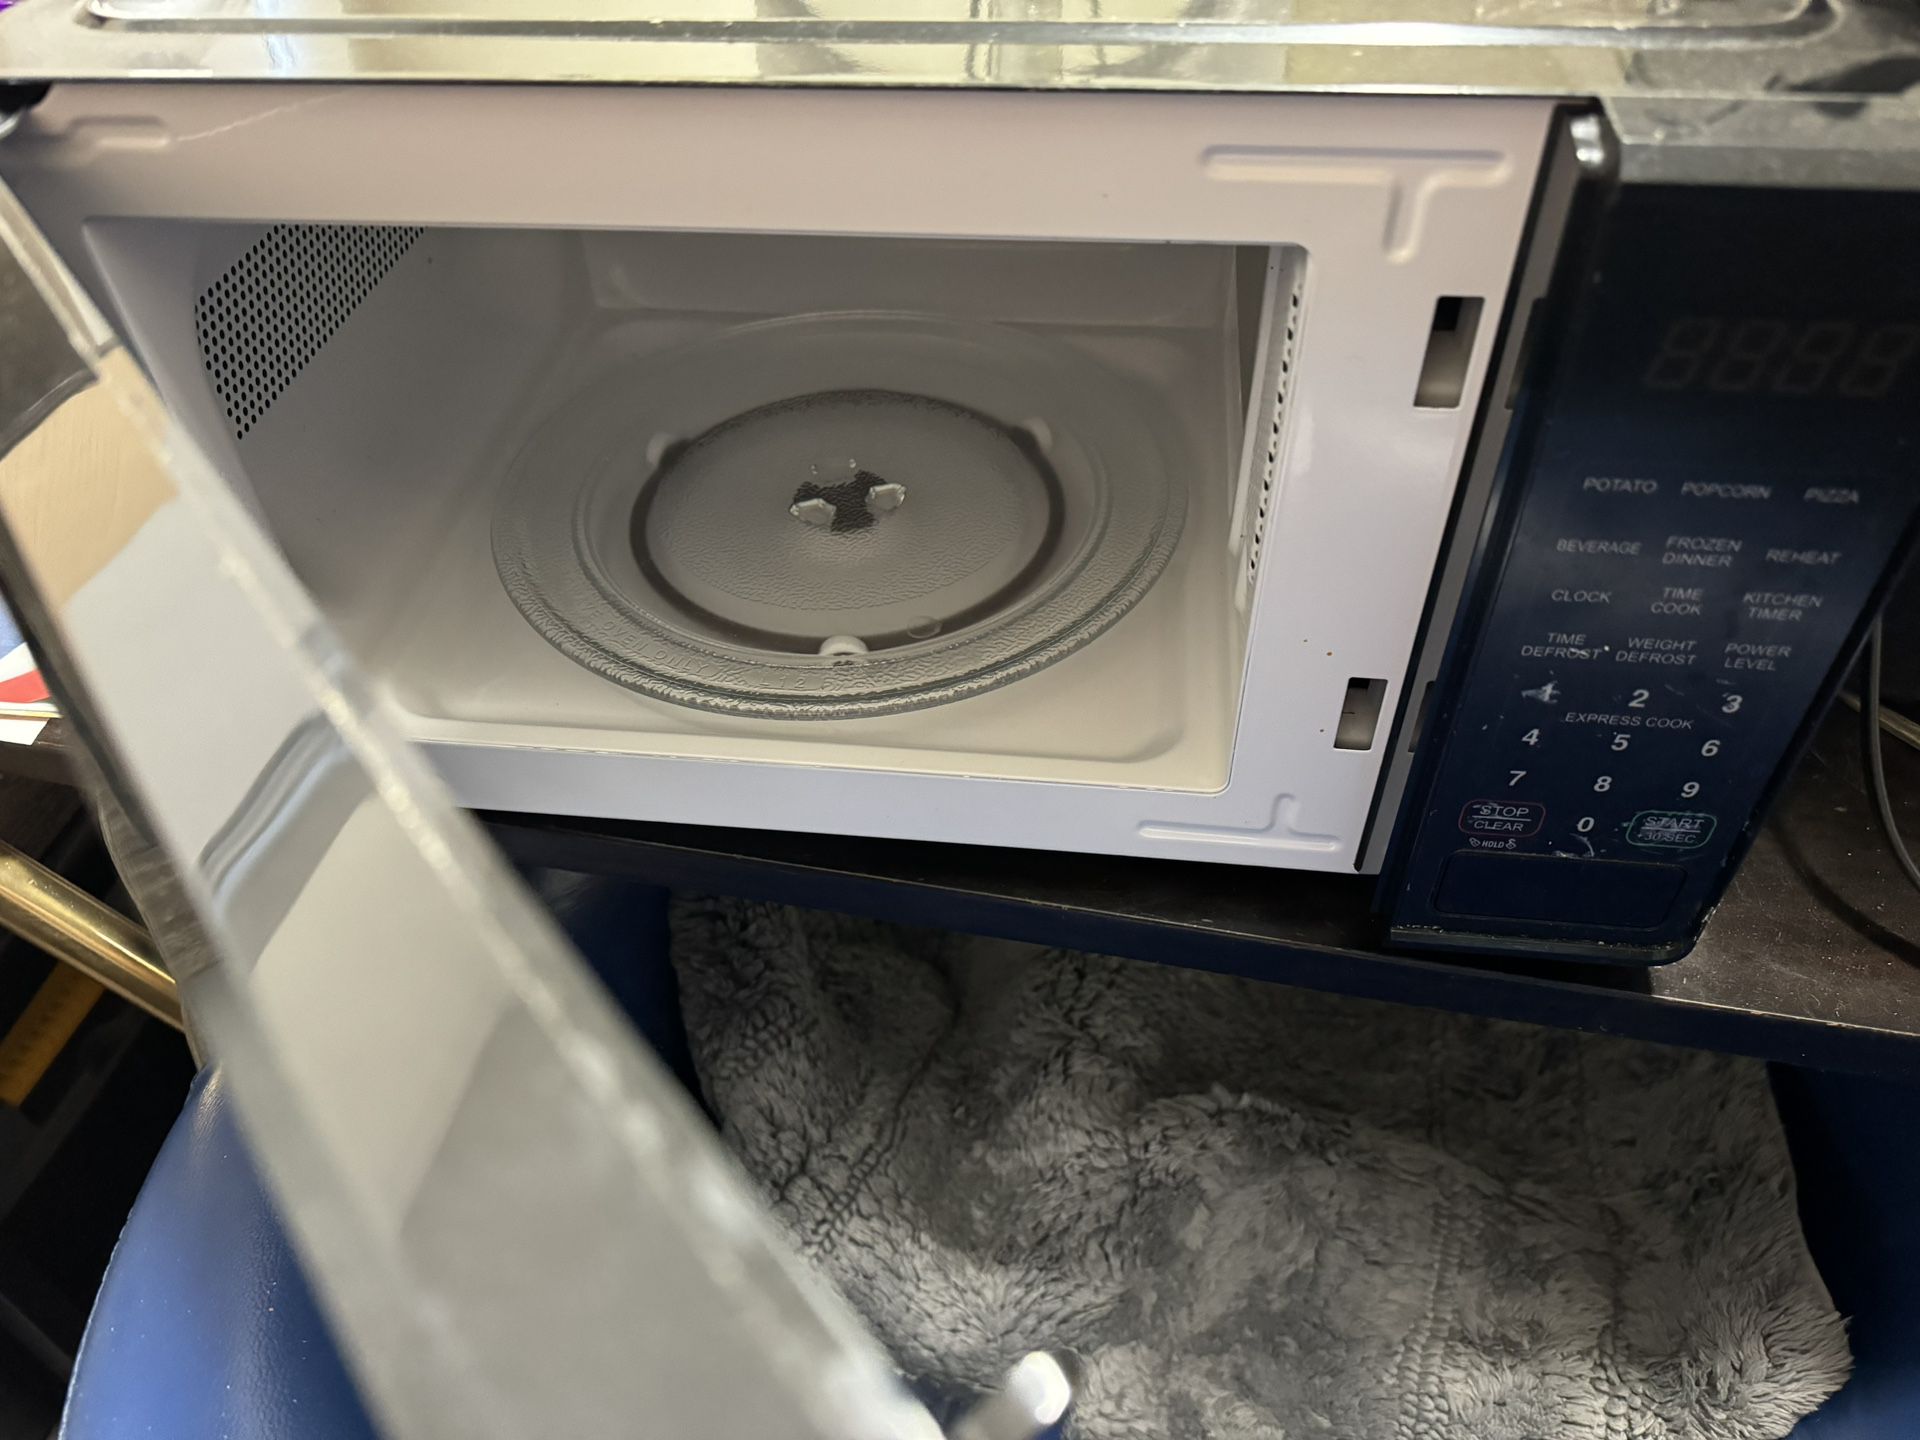 Small Super Clean Microwave For $25